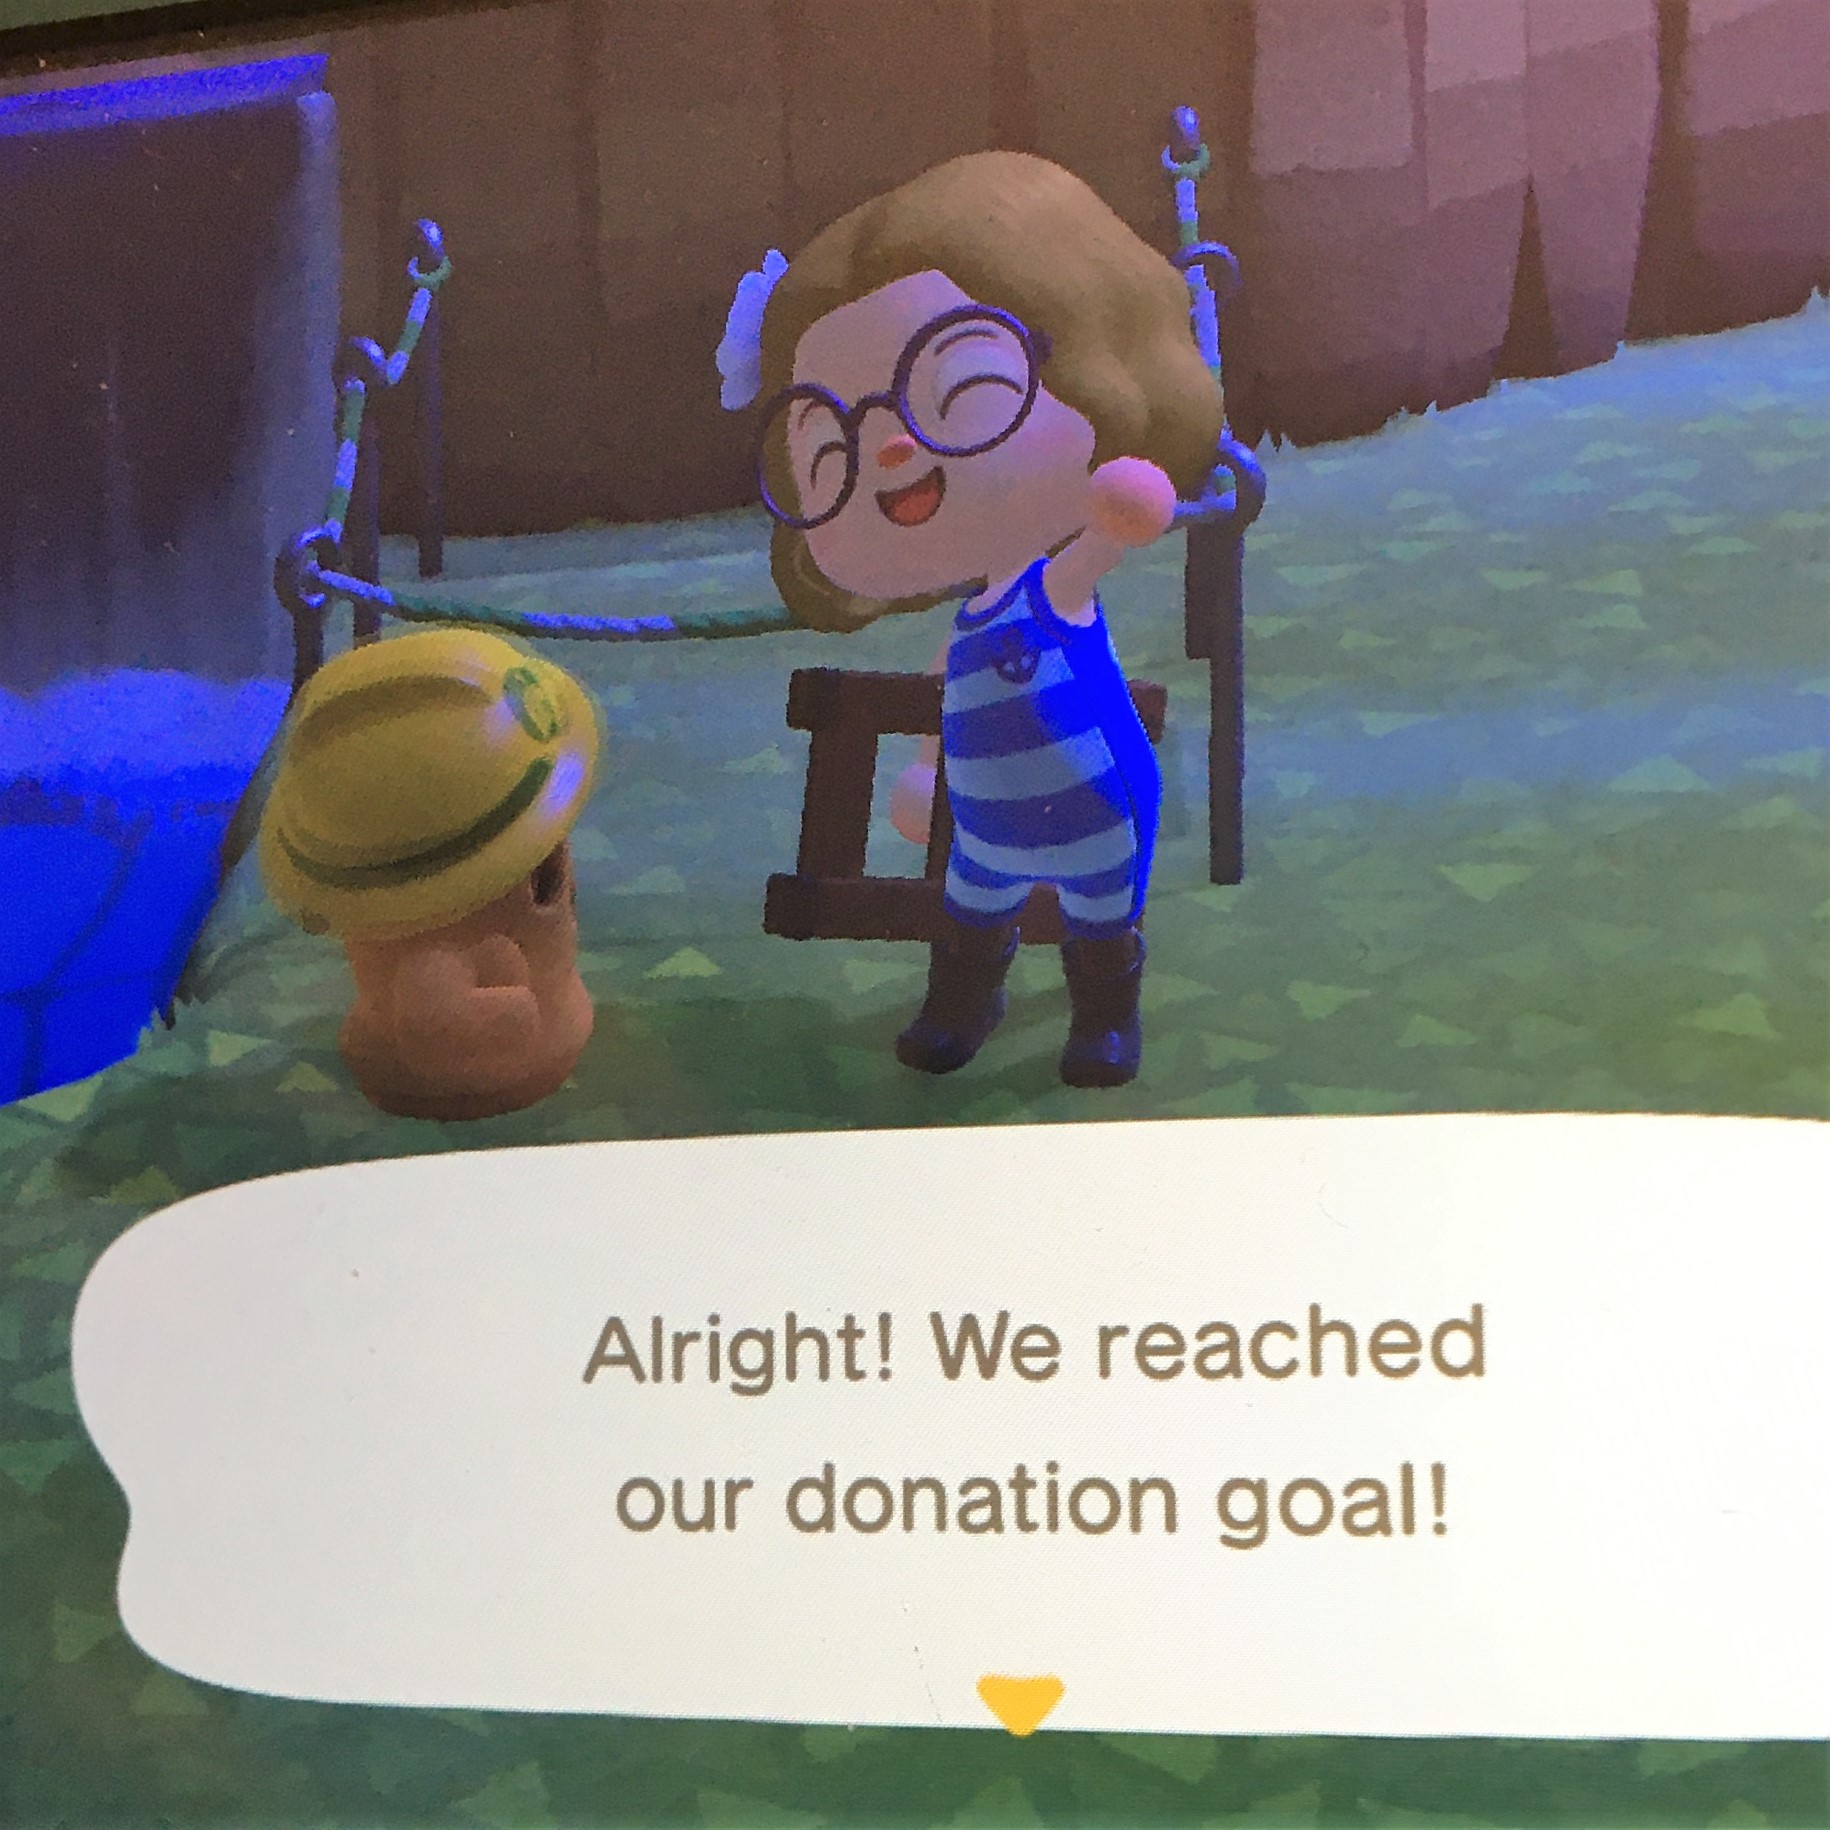 Playing at Philanthropy in Animal Crossing